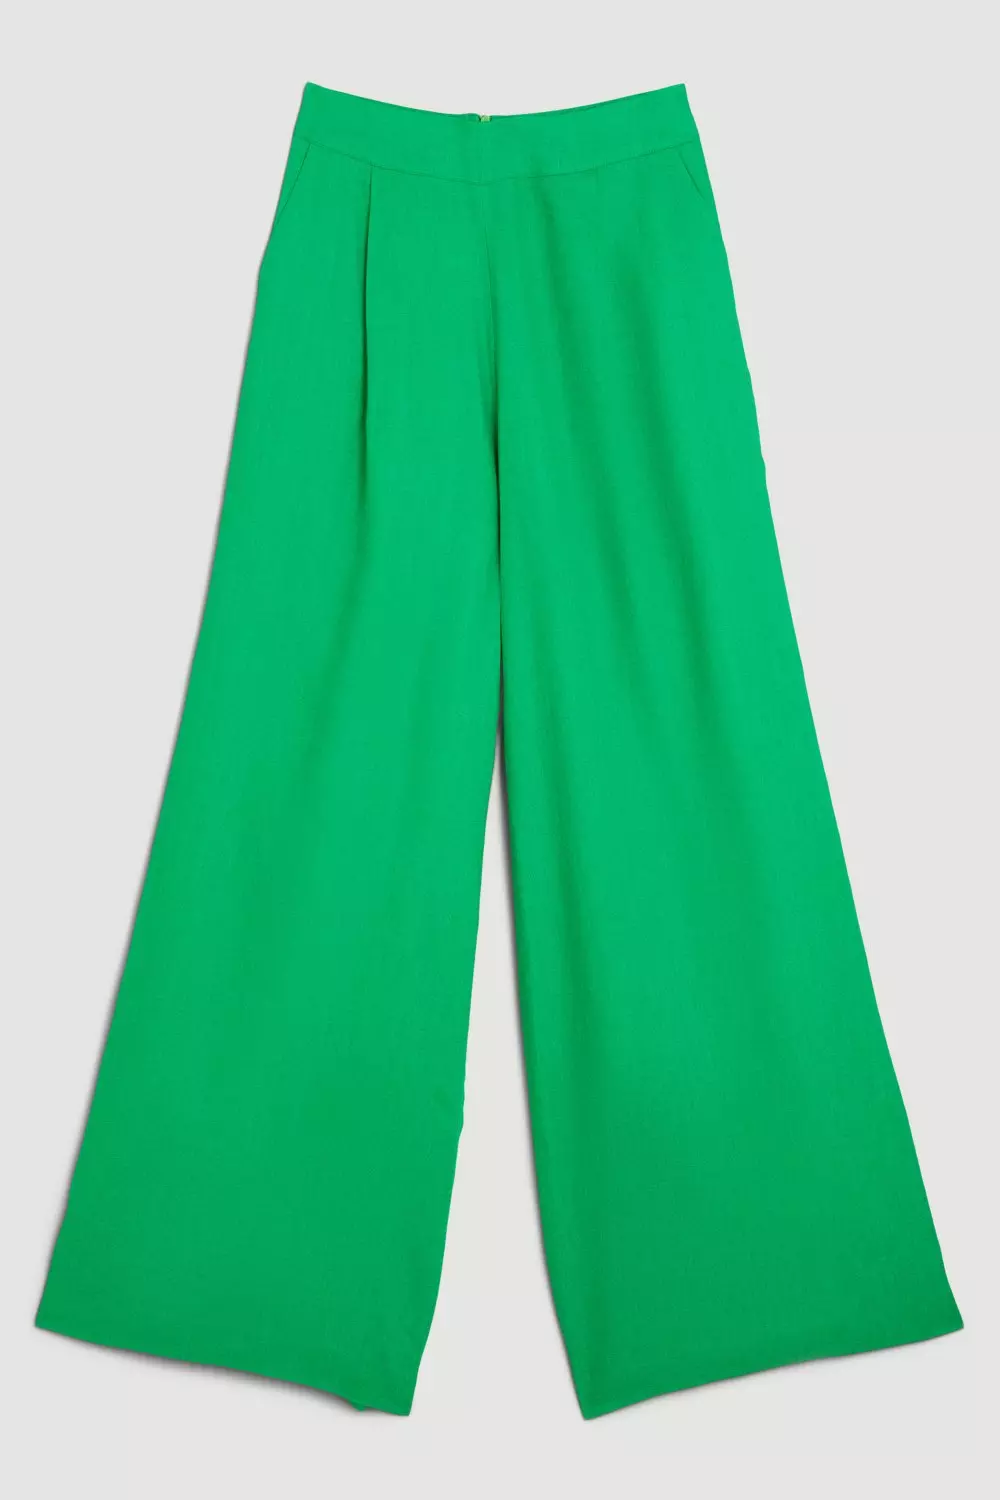 Wide Leg Linen Pants - for Beach, Lunch, or Hanging out! - Karen